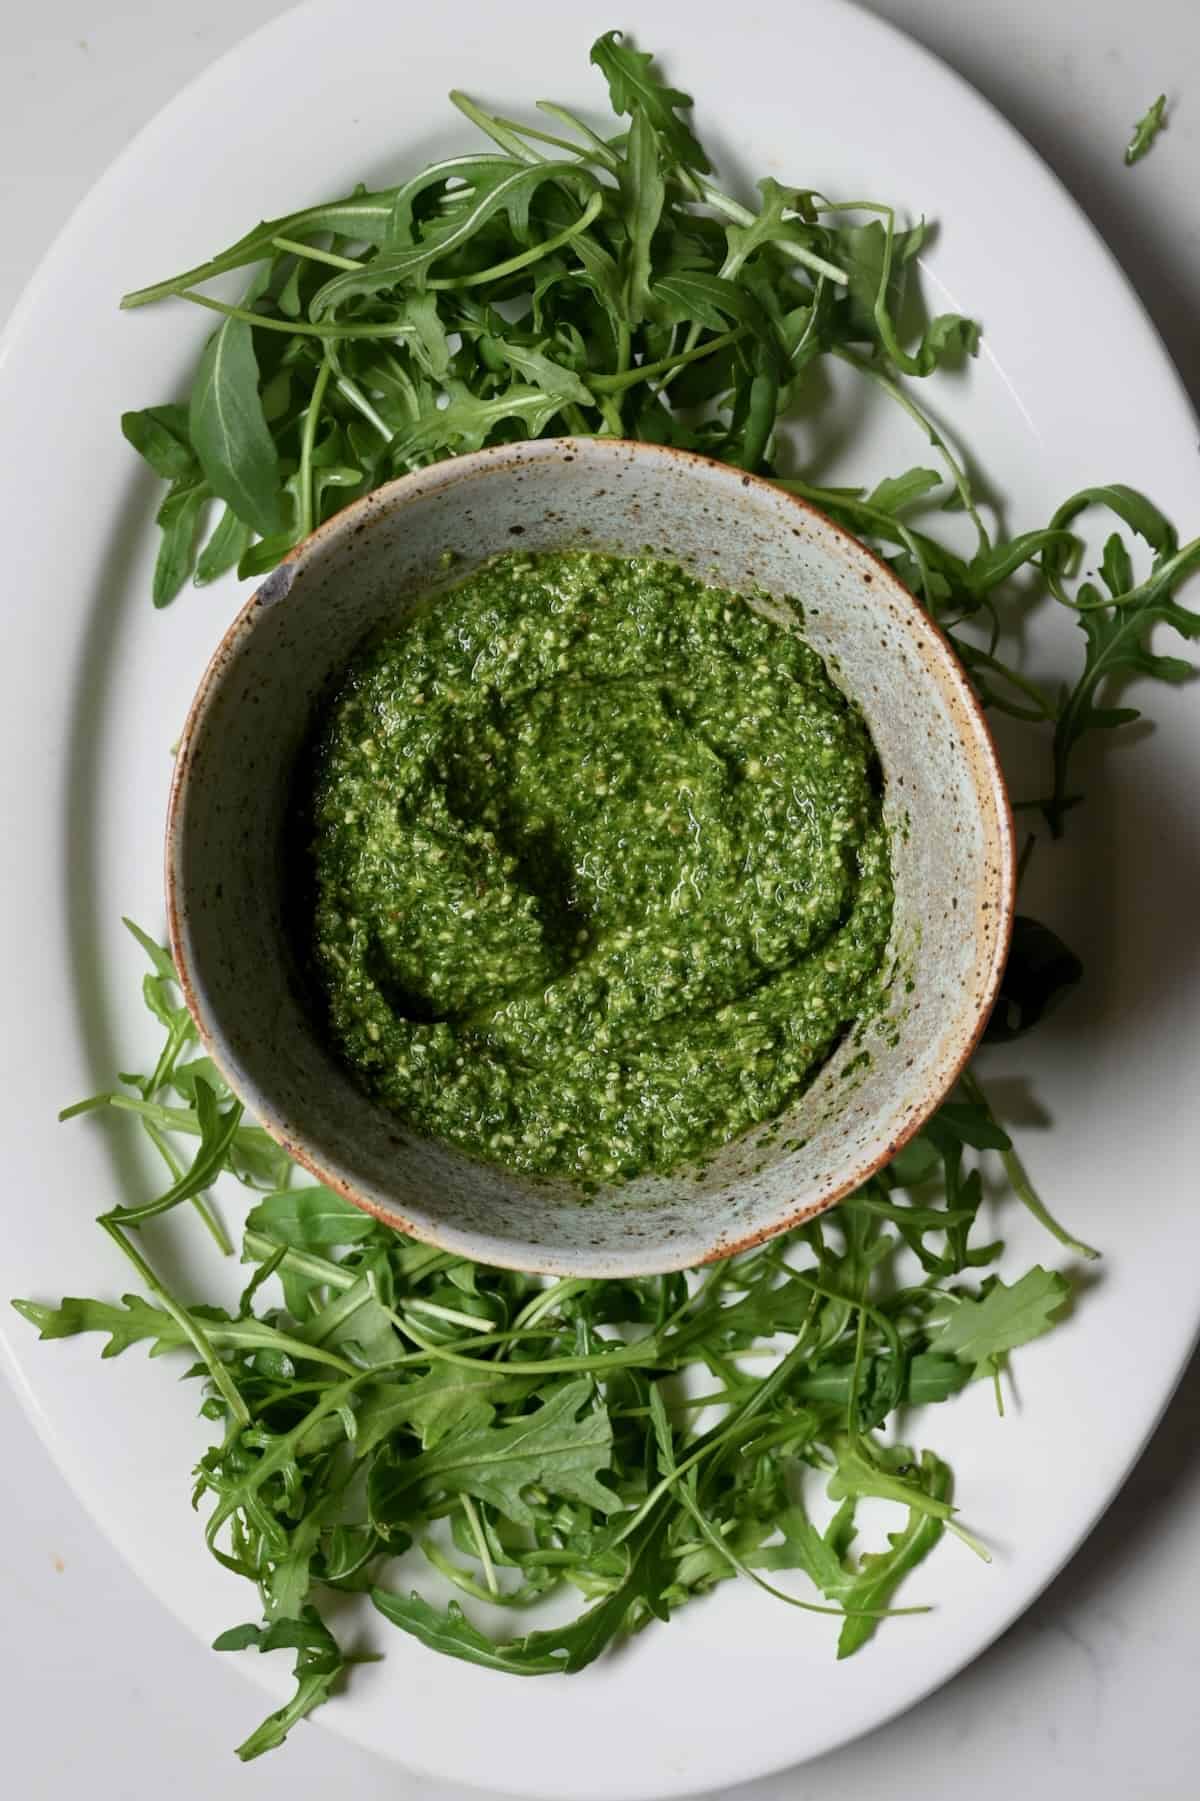 Pesto made from arugula in a bowl